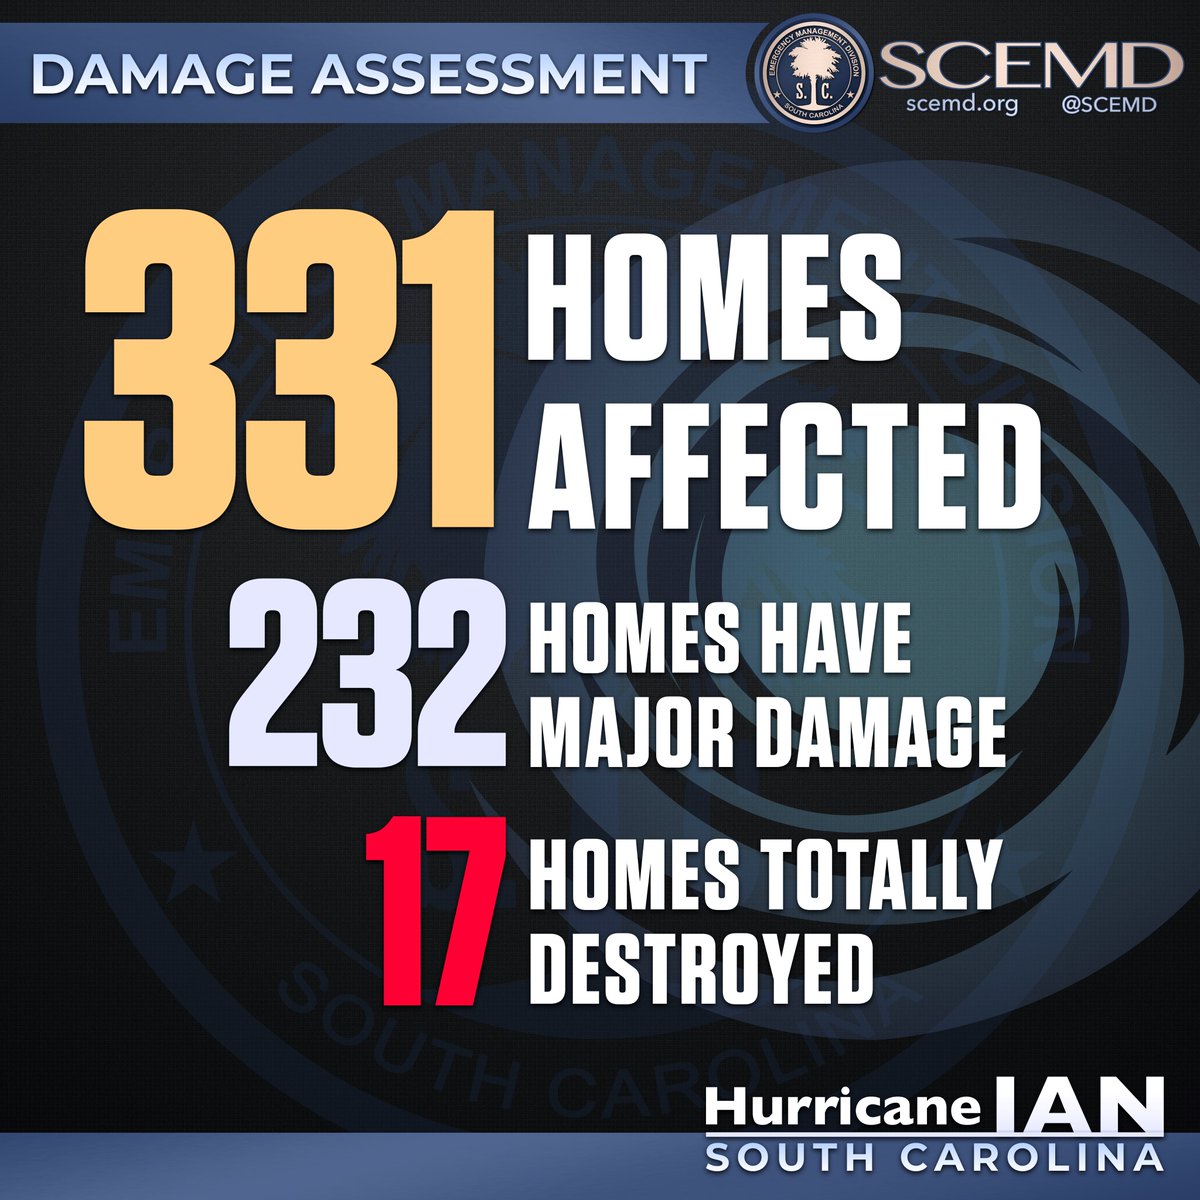 Extensive damage assessments conducted statewide by local officials, @SCEMD & @FEMA in the weeks following Hurricane #Ian revealed 17 homes were destroyed, 232 homes experienced major damage, & 82 homes experienced minor damage. More: scemd.org/news/gov-henry… #sctweets #scwx